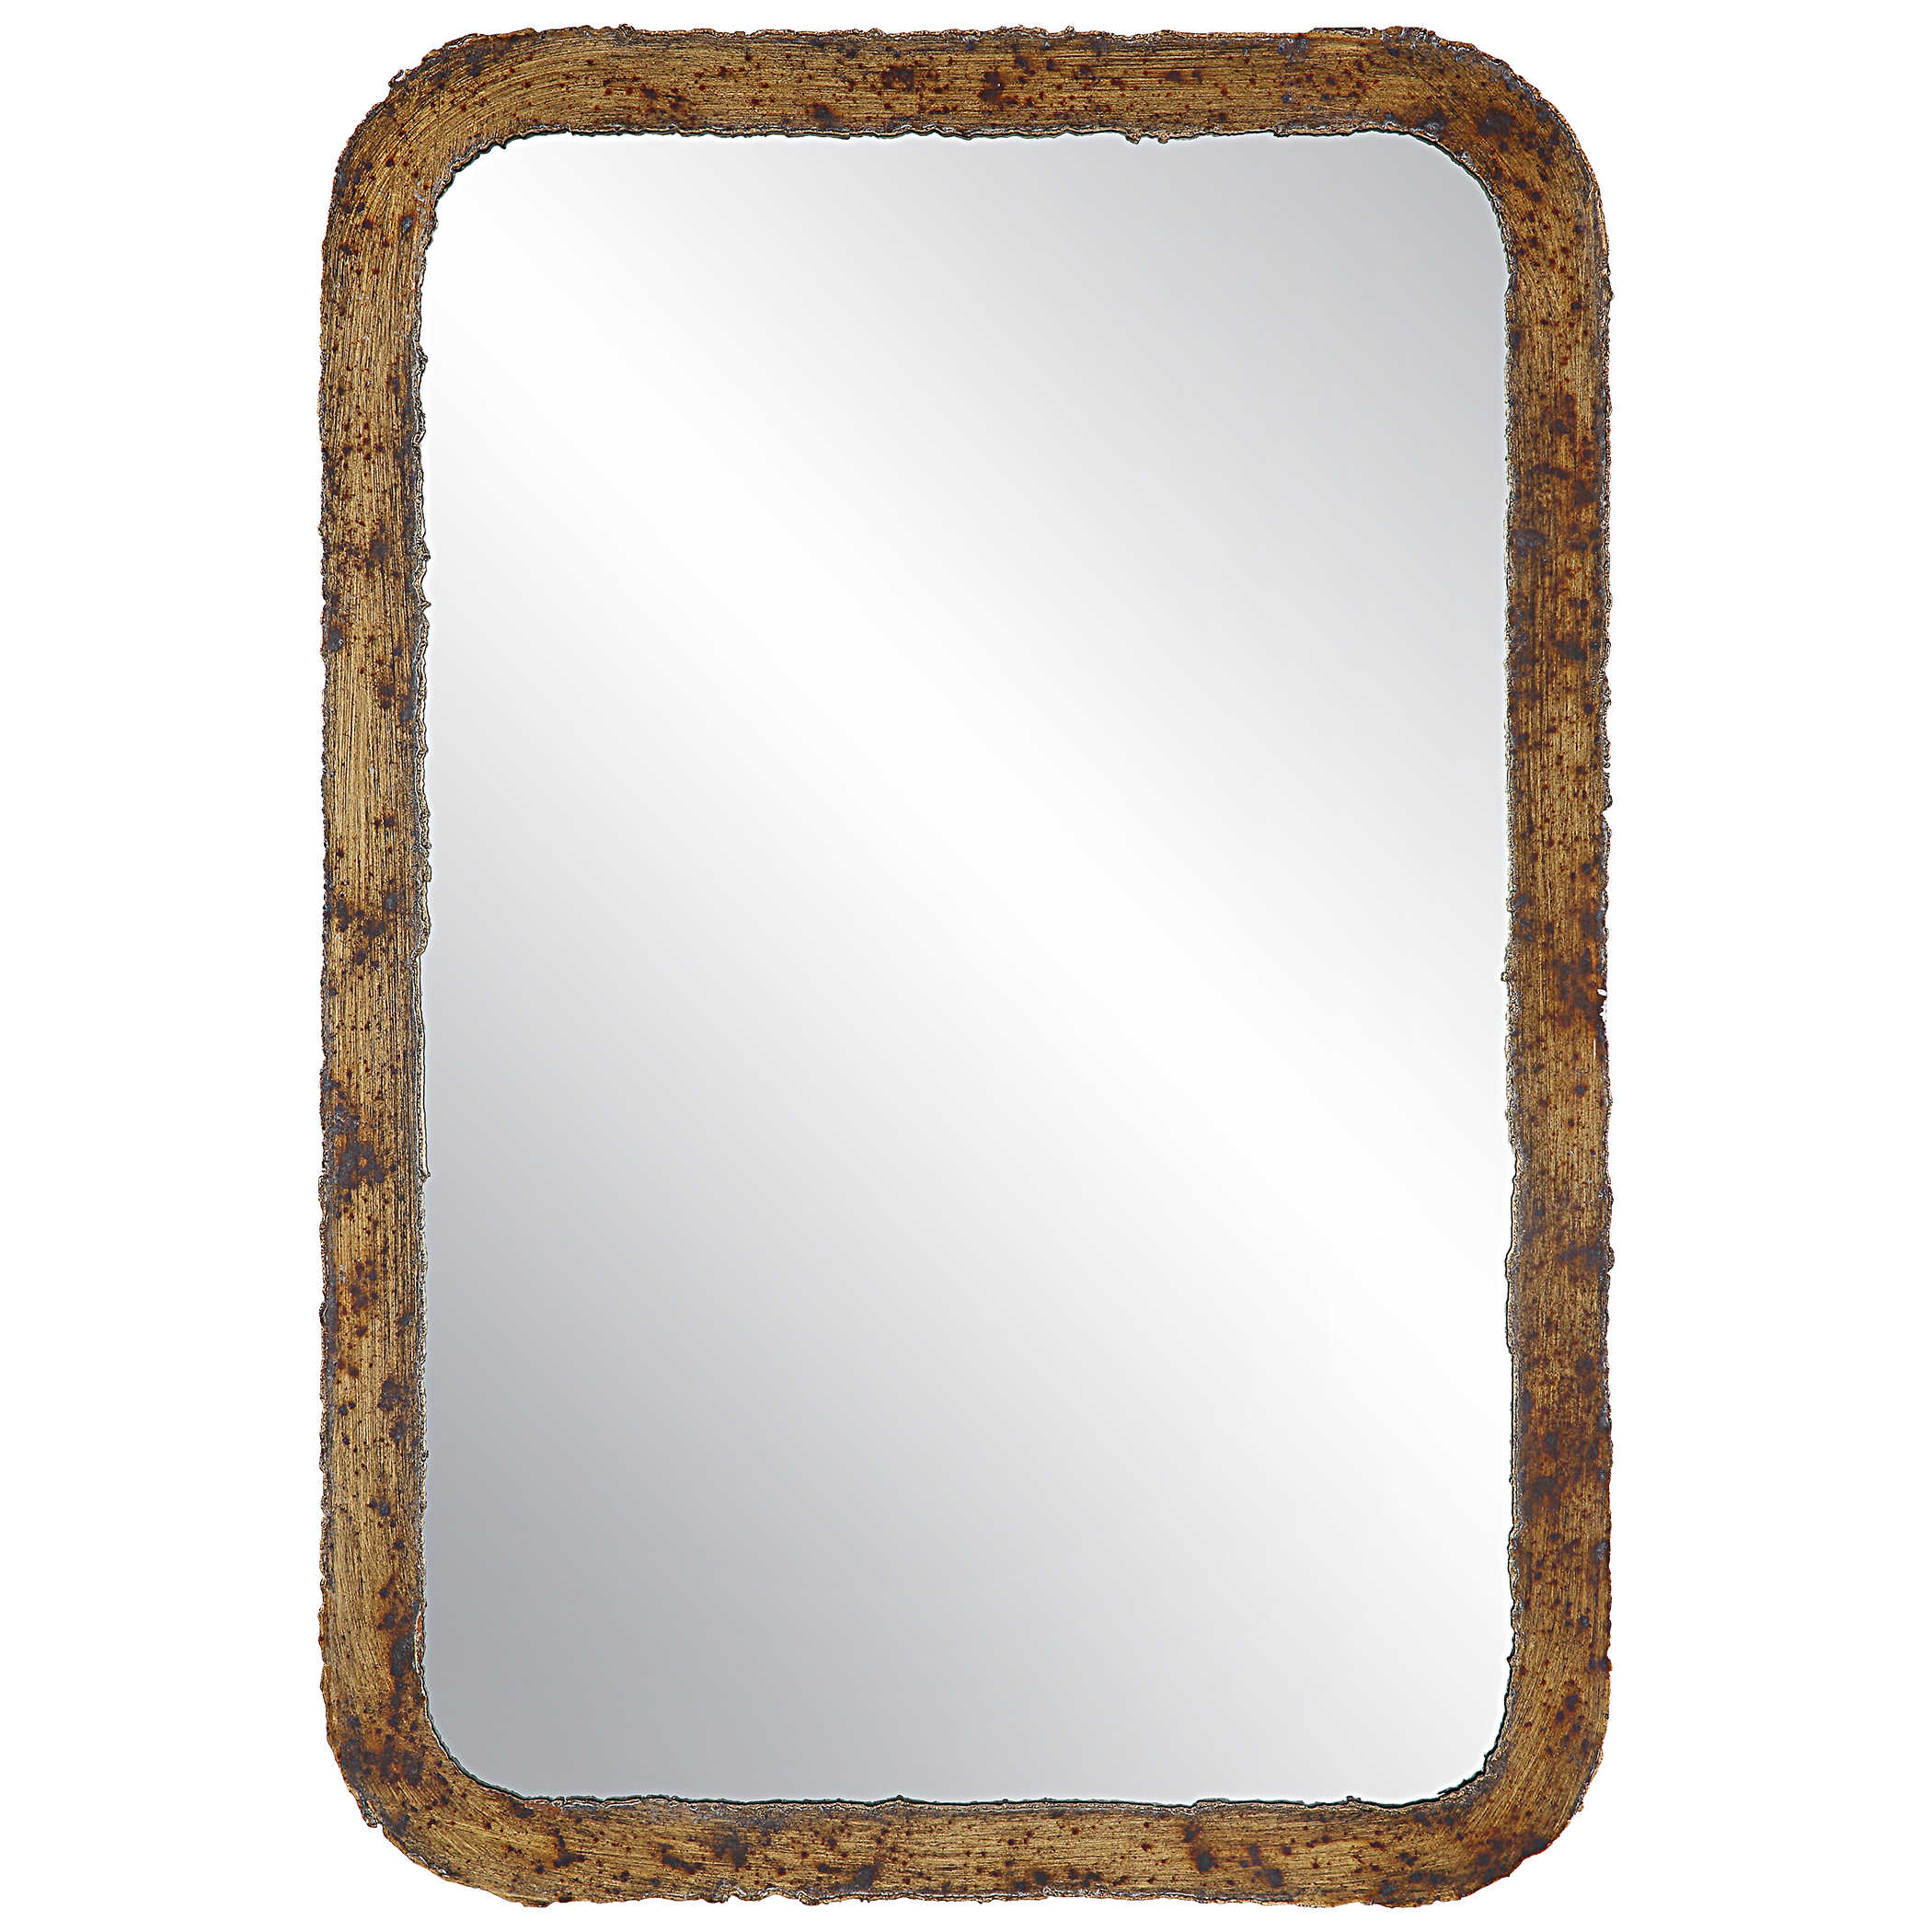 Uttermost Manning Brushed Nickel 22 1/2 x 32 Wall Mirror